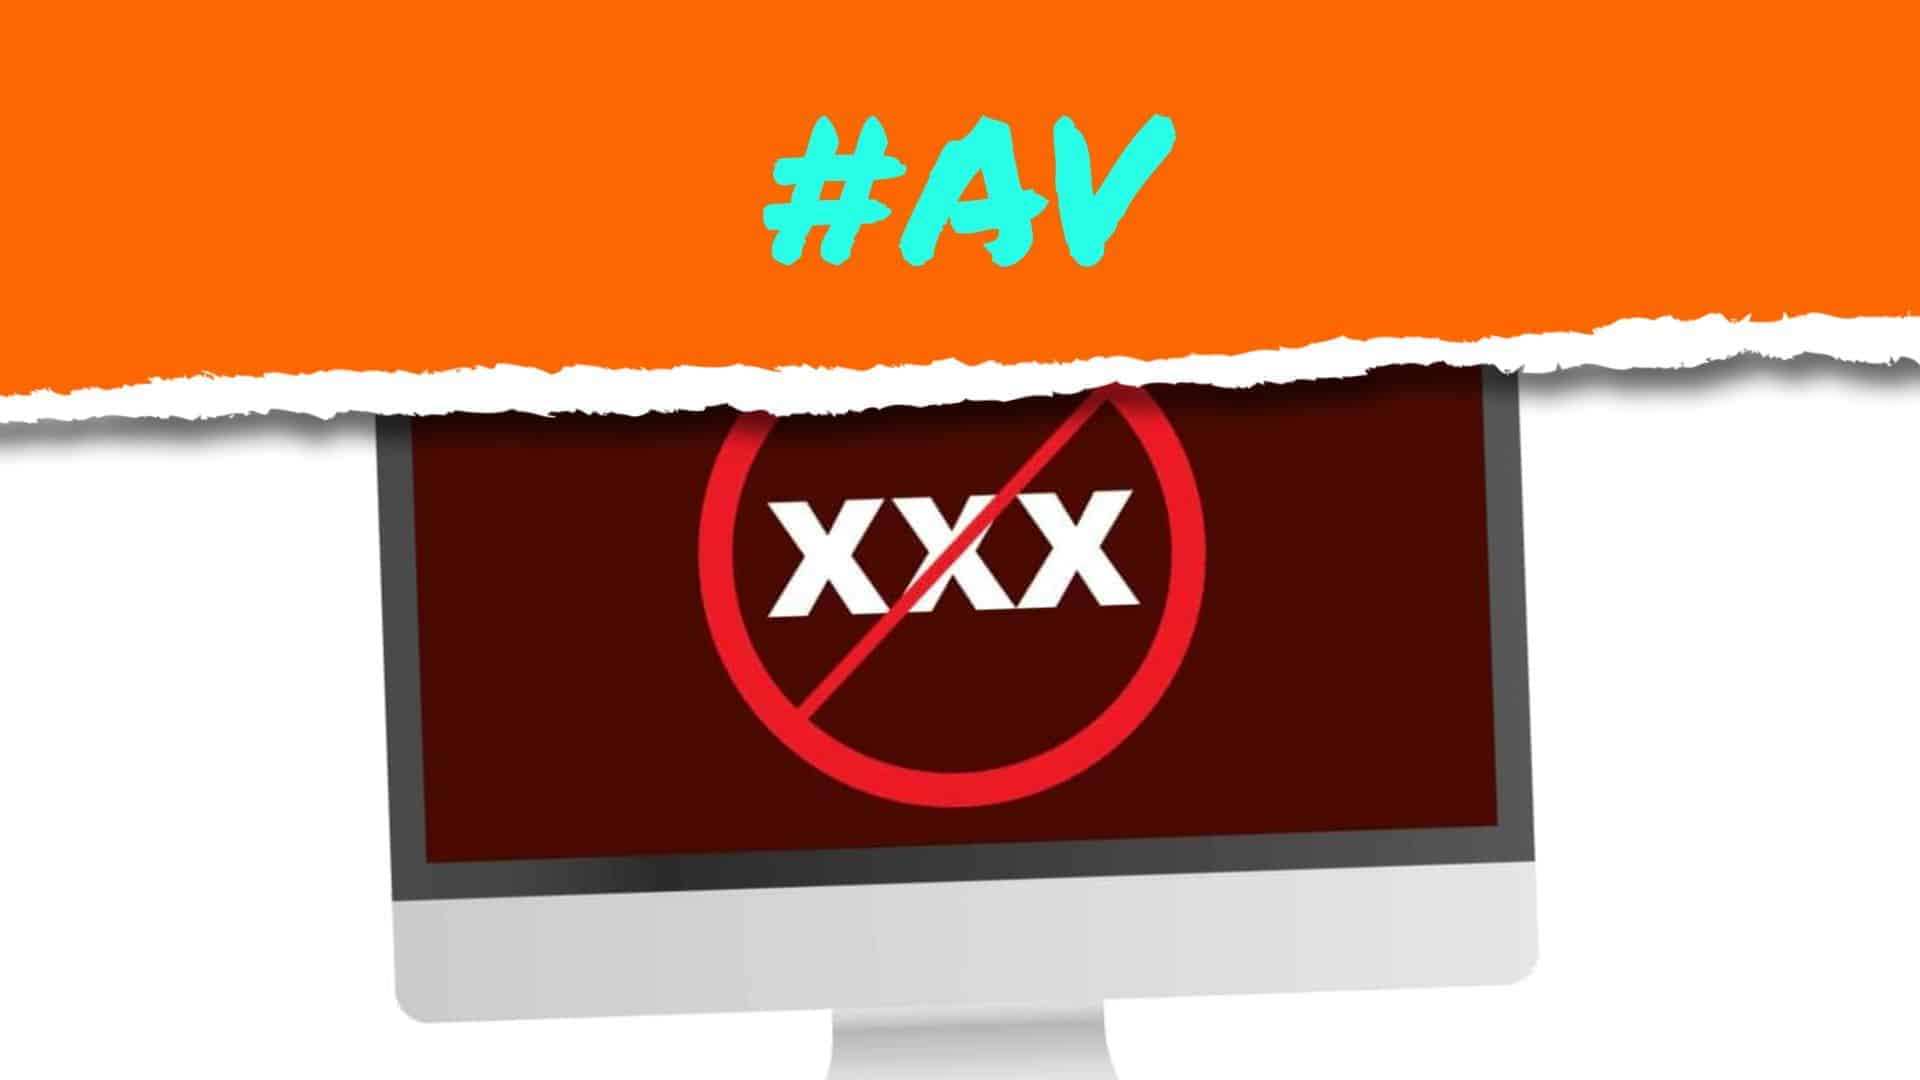 A computer screen with the word vxx on it showcases potential "chilling" future plans.